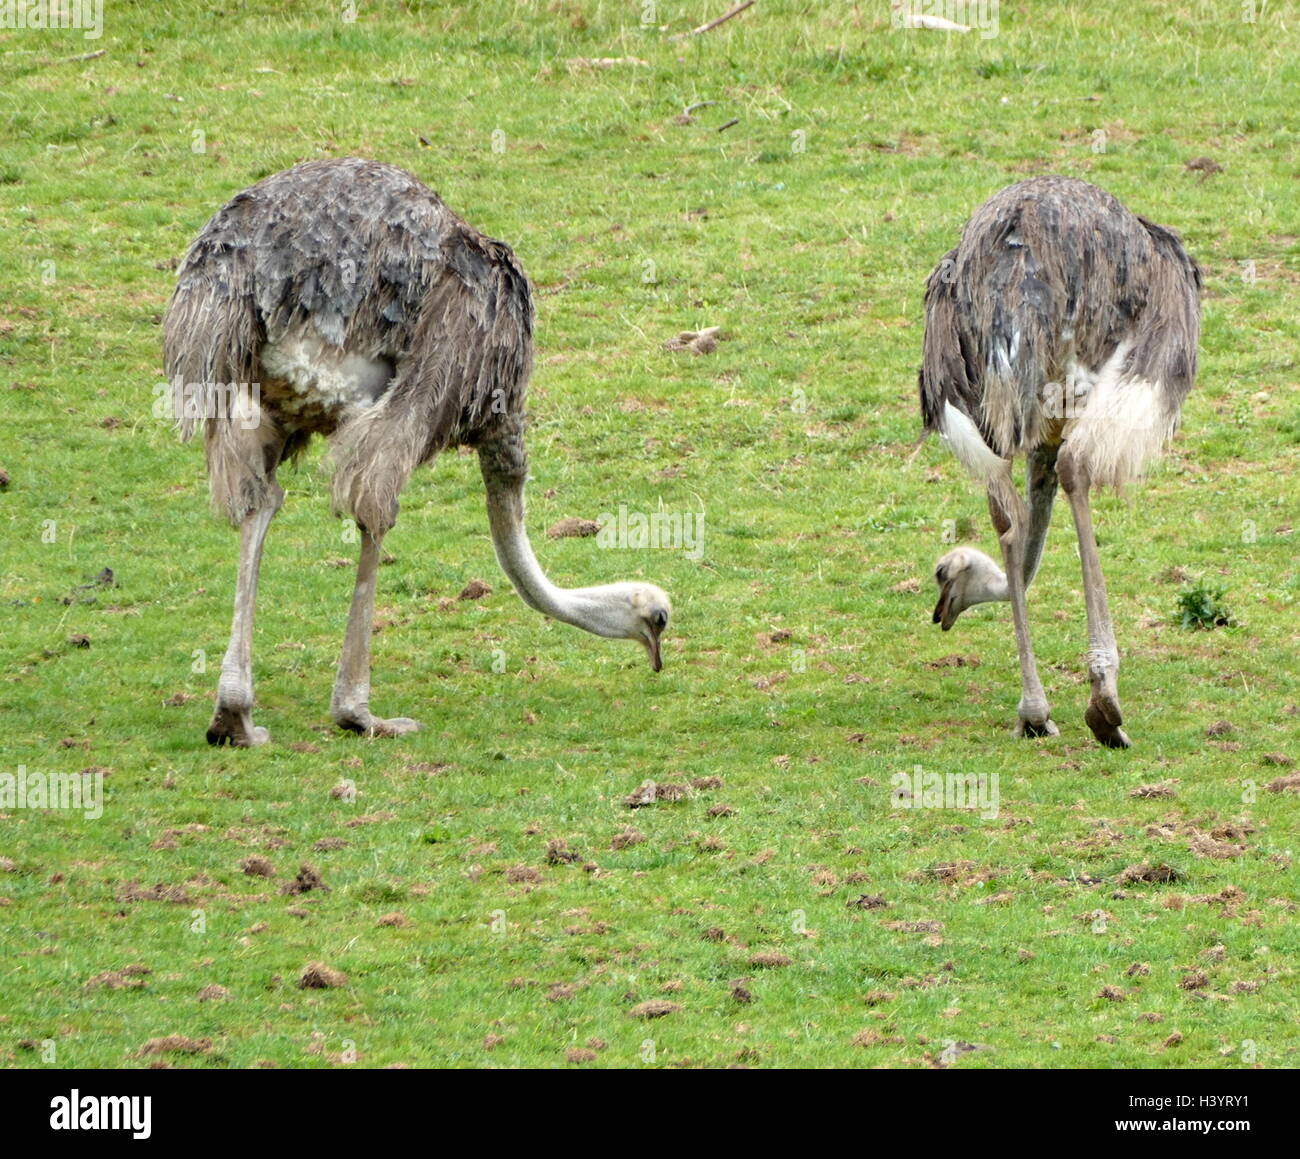 The ostrich or common ostrich (Struthio camelus) is either one or two species of large flightless birds native to Africa, the only living member(s) of the genus Struthio, which is in the ratite family Stock Photo